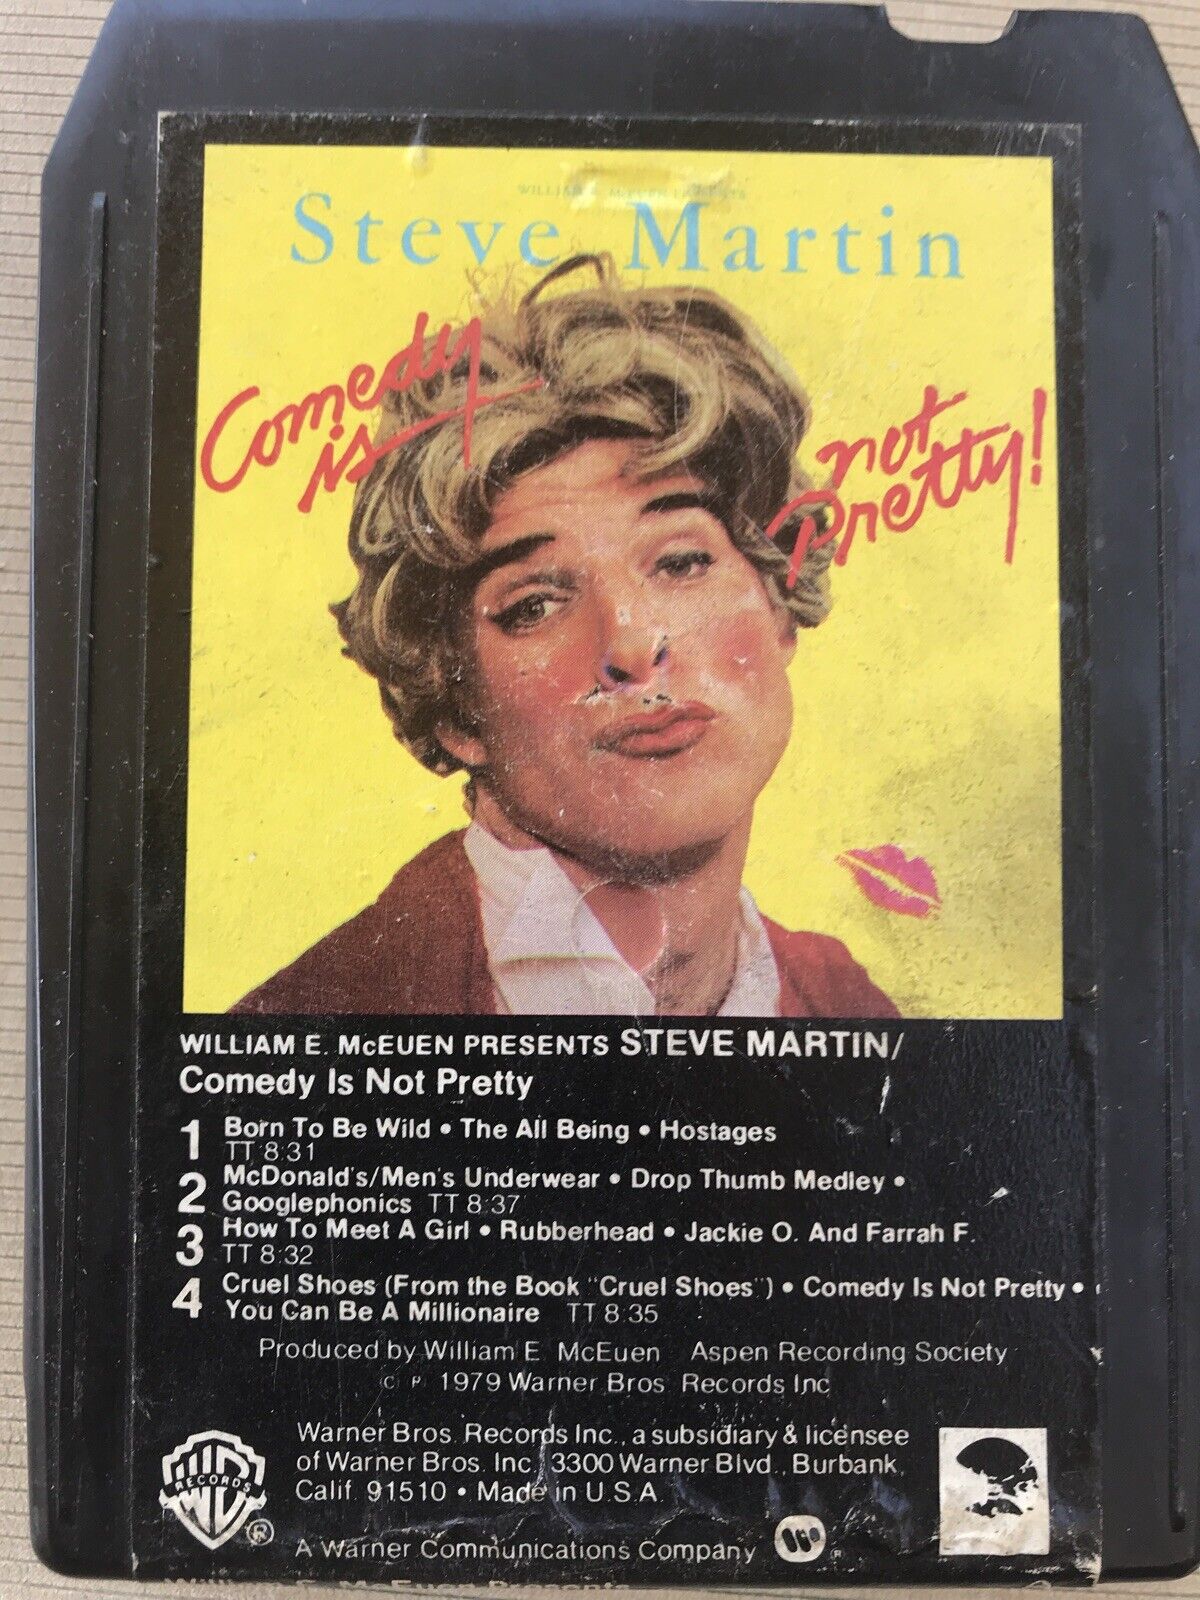 Lot (2) 8 Track Tapes by Steve Martin - Comedy Is Not Pretty & Let's Get Small Без бренда - фотография #2